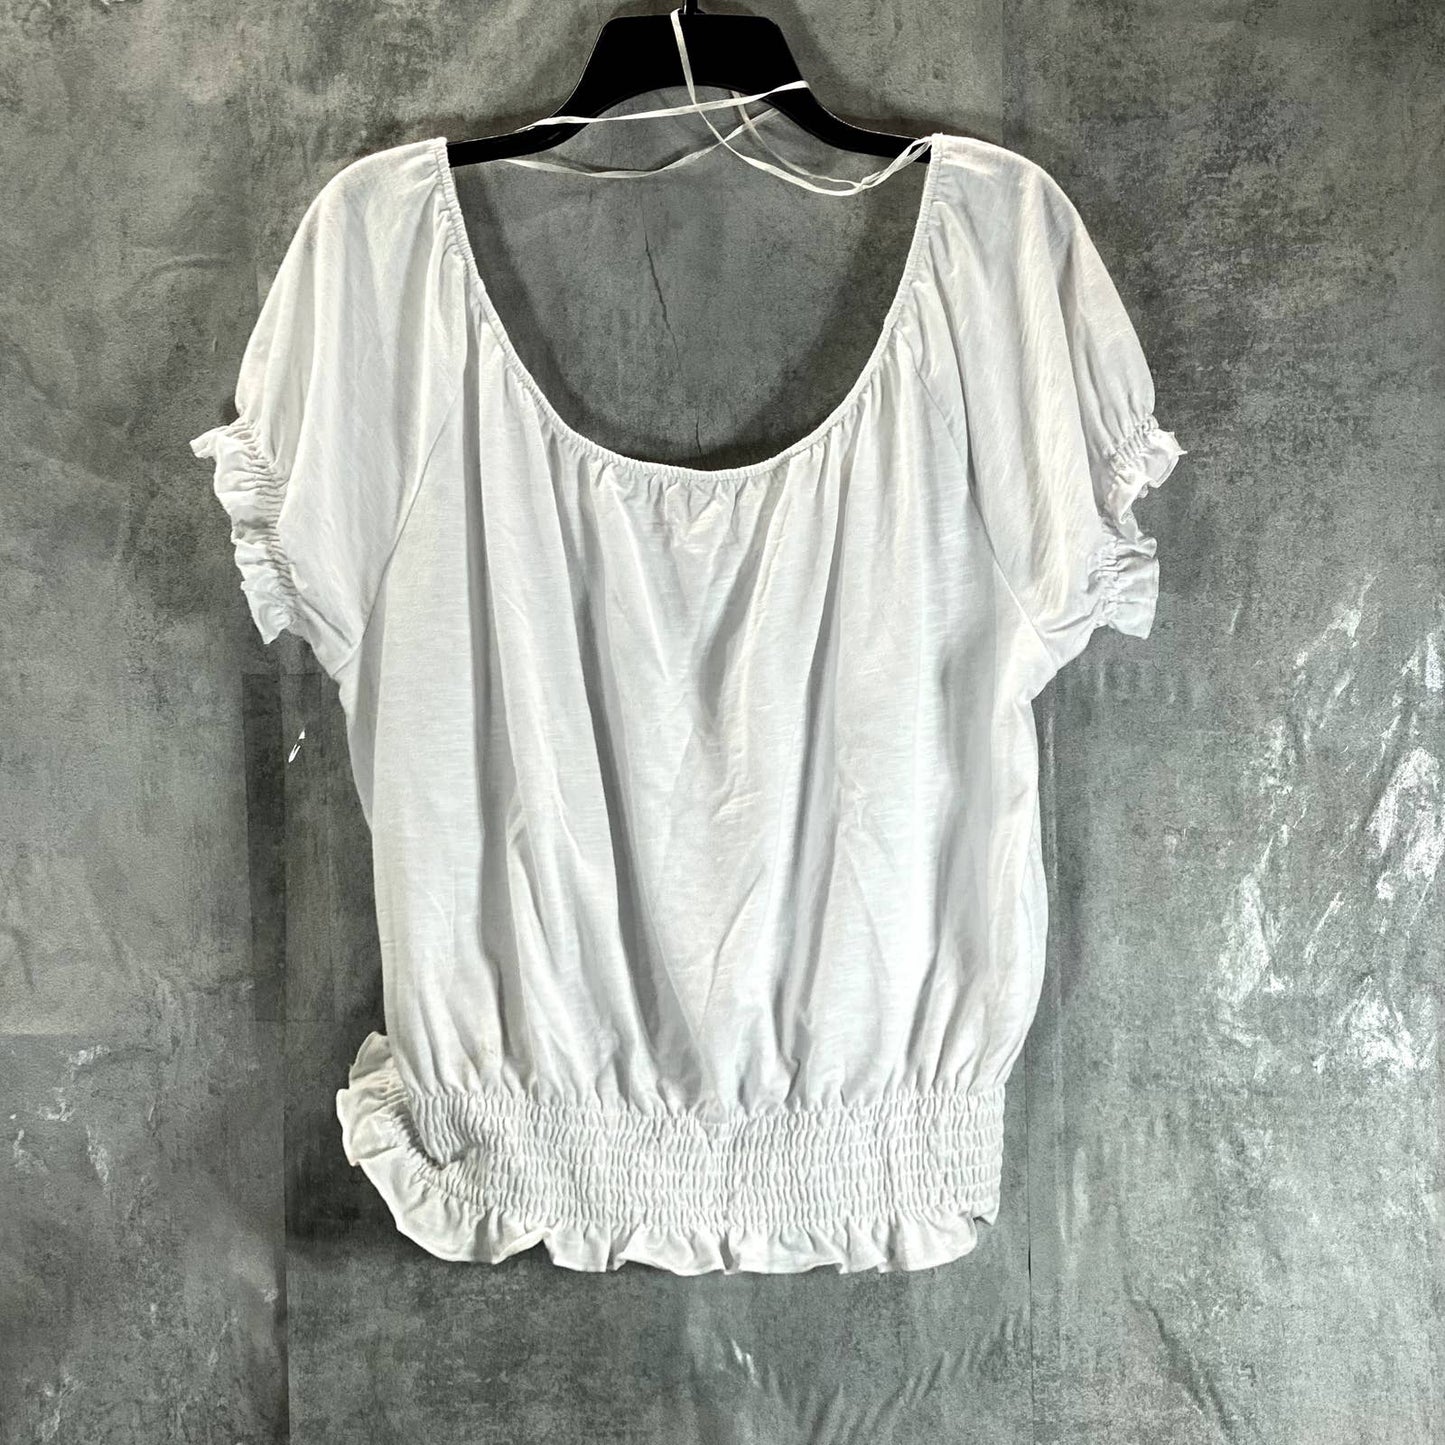 TOMMY JEANS Women's White Smocked Scoop-Neck Short Sleeve Peasant Top SZ L